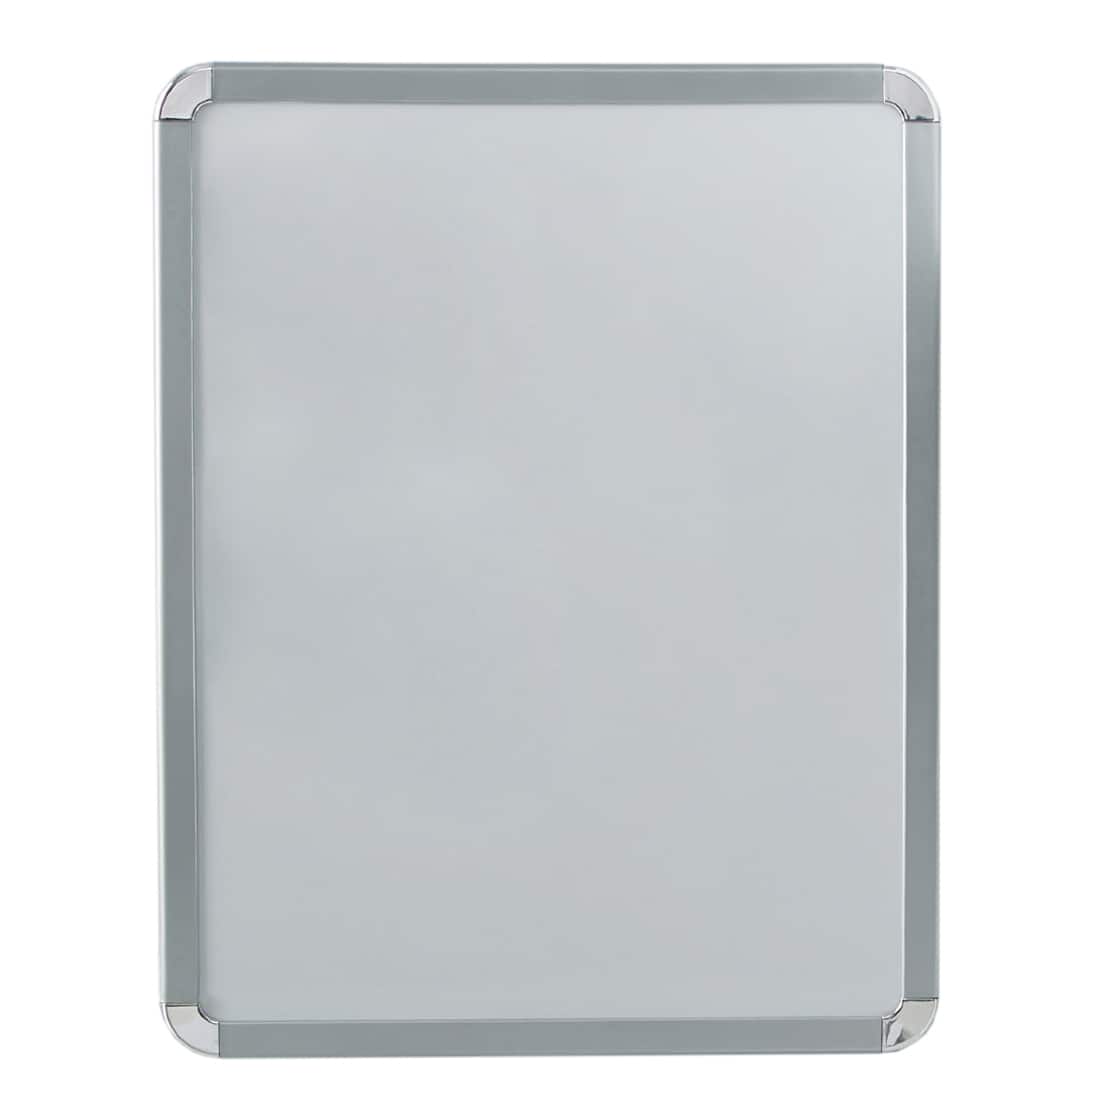 White Frame .1 Pack Contempo Magnetic Dry Erase Board White 11 x 14 Inches 